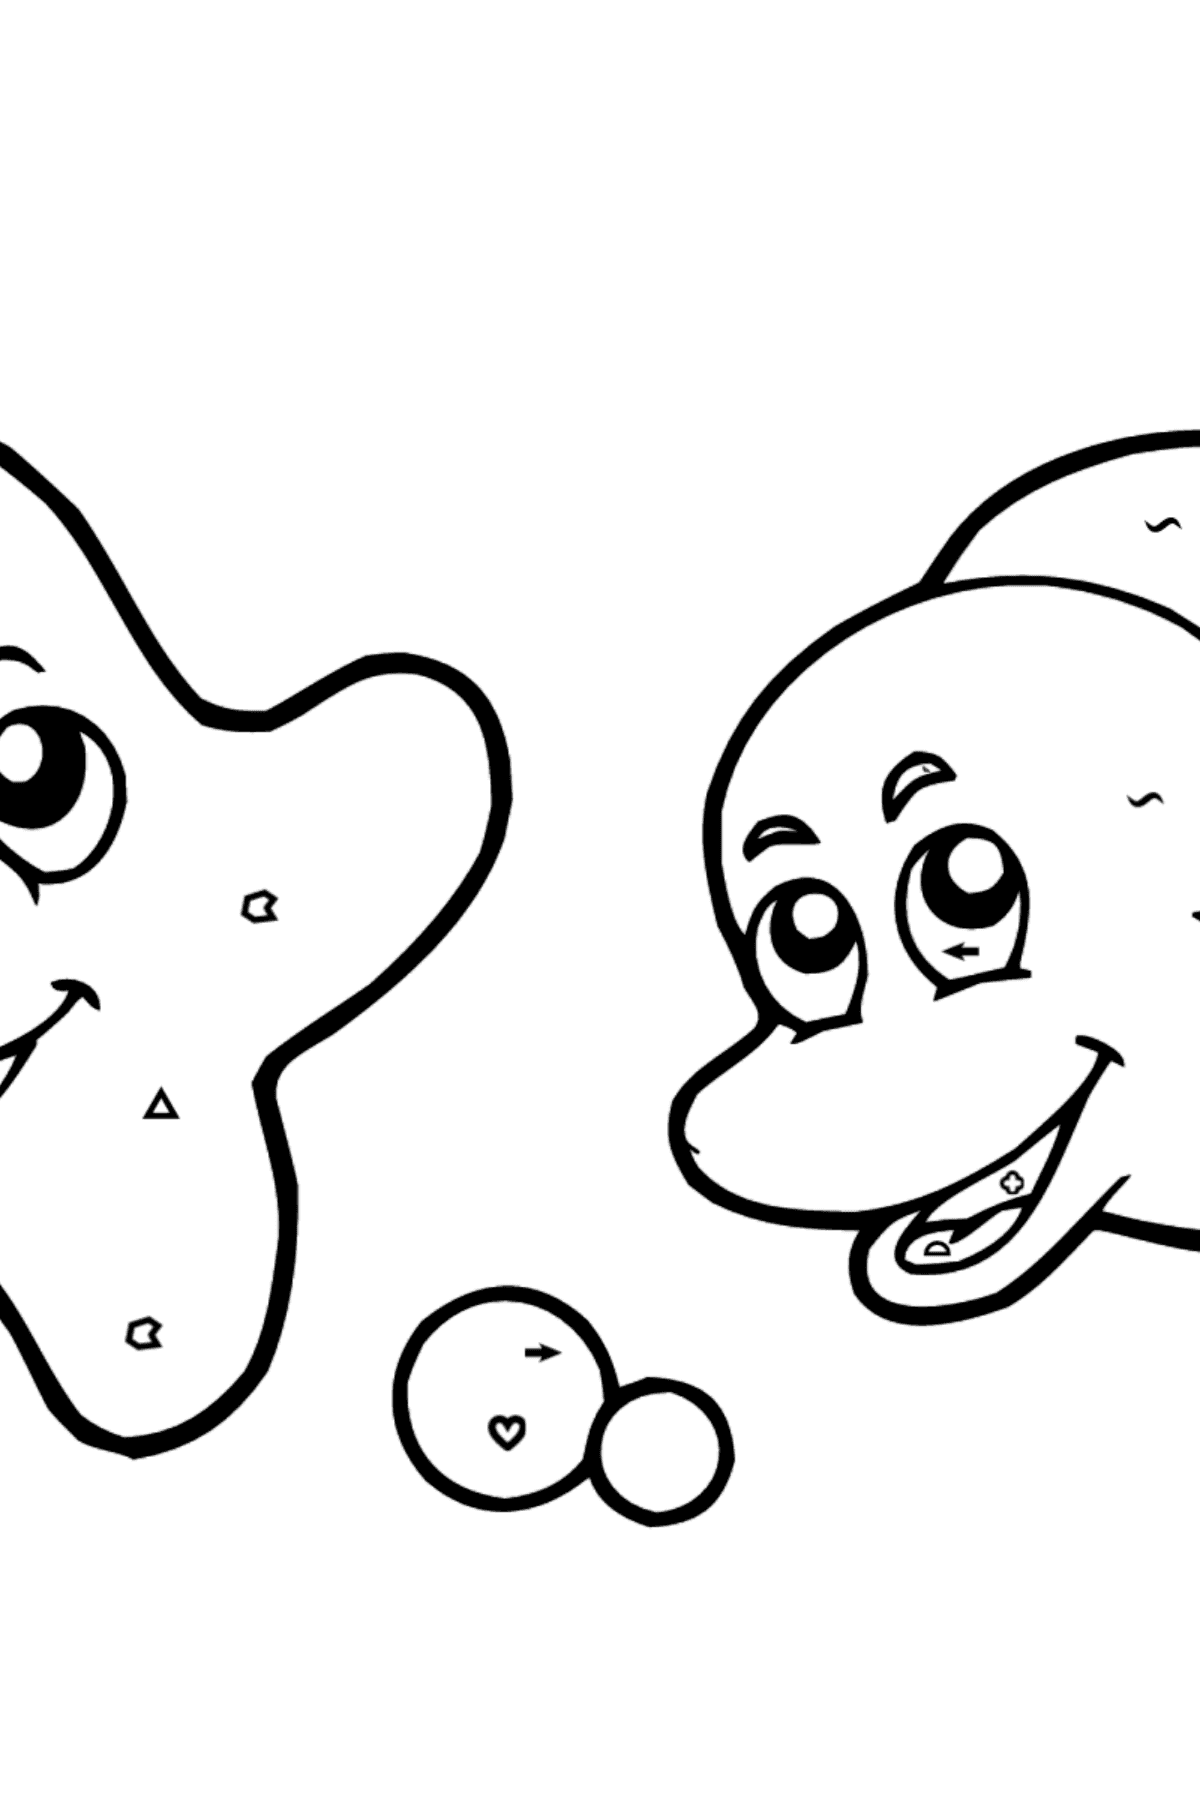 Dolphin and Starfish Coloring page - Coloring by Symbols and Geometric Shapes for Kids